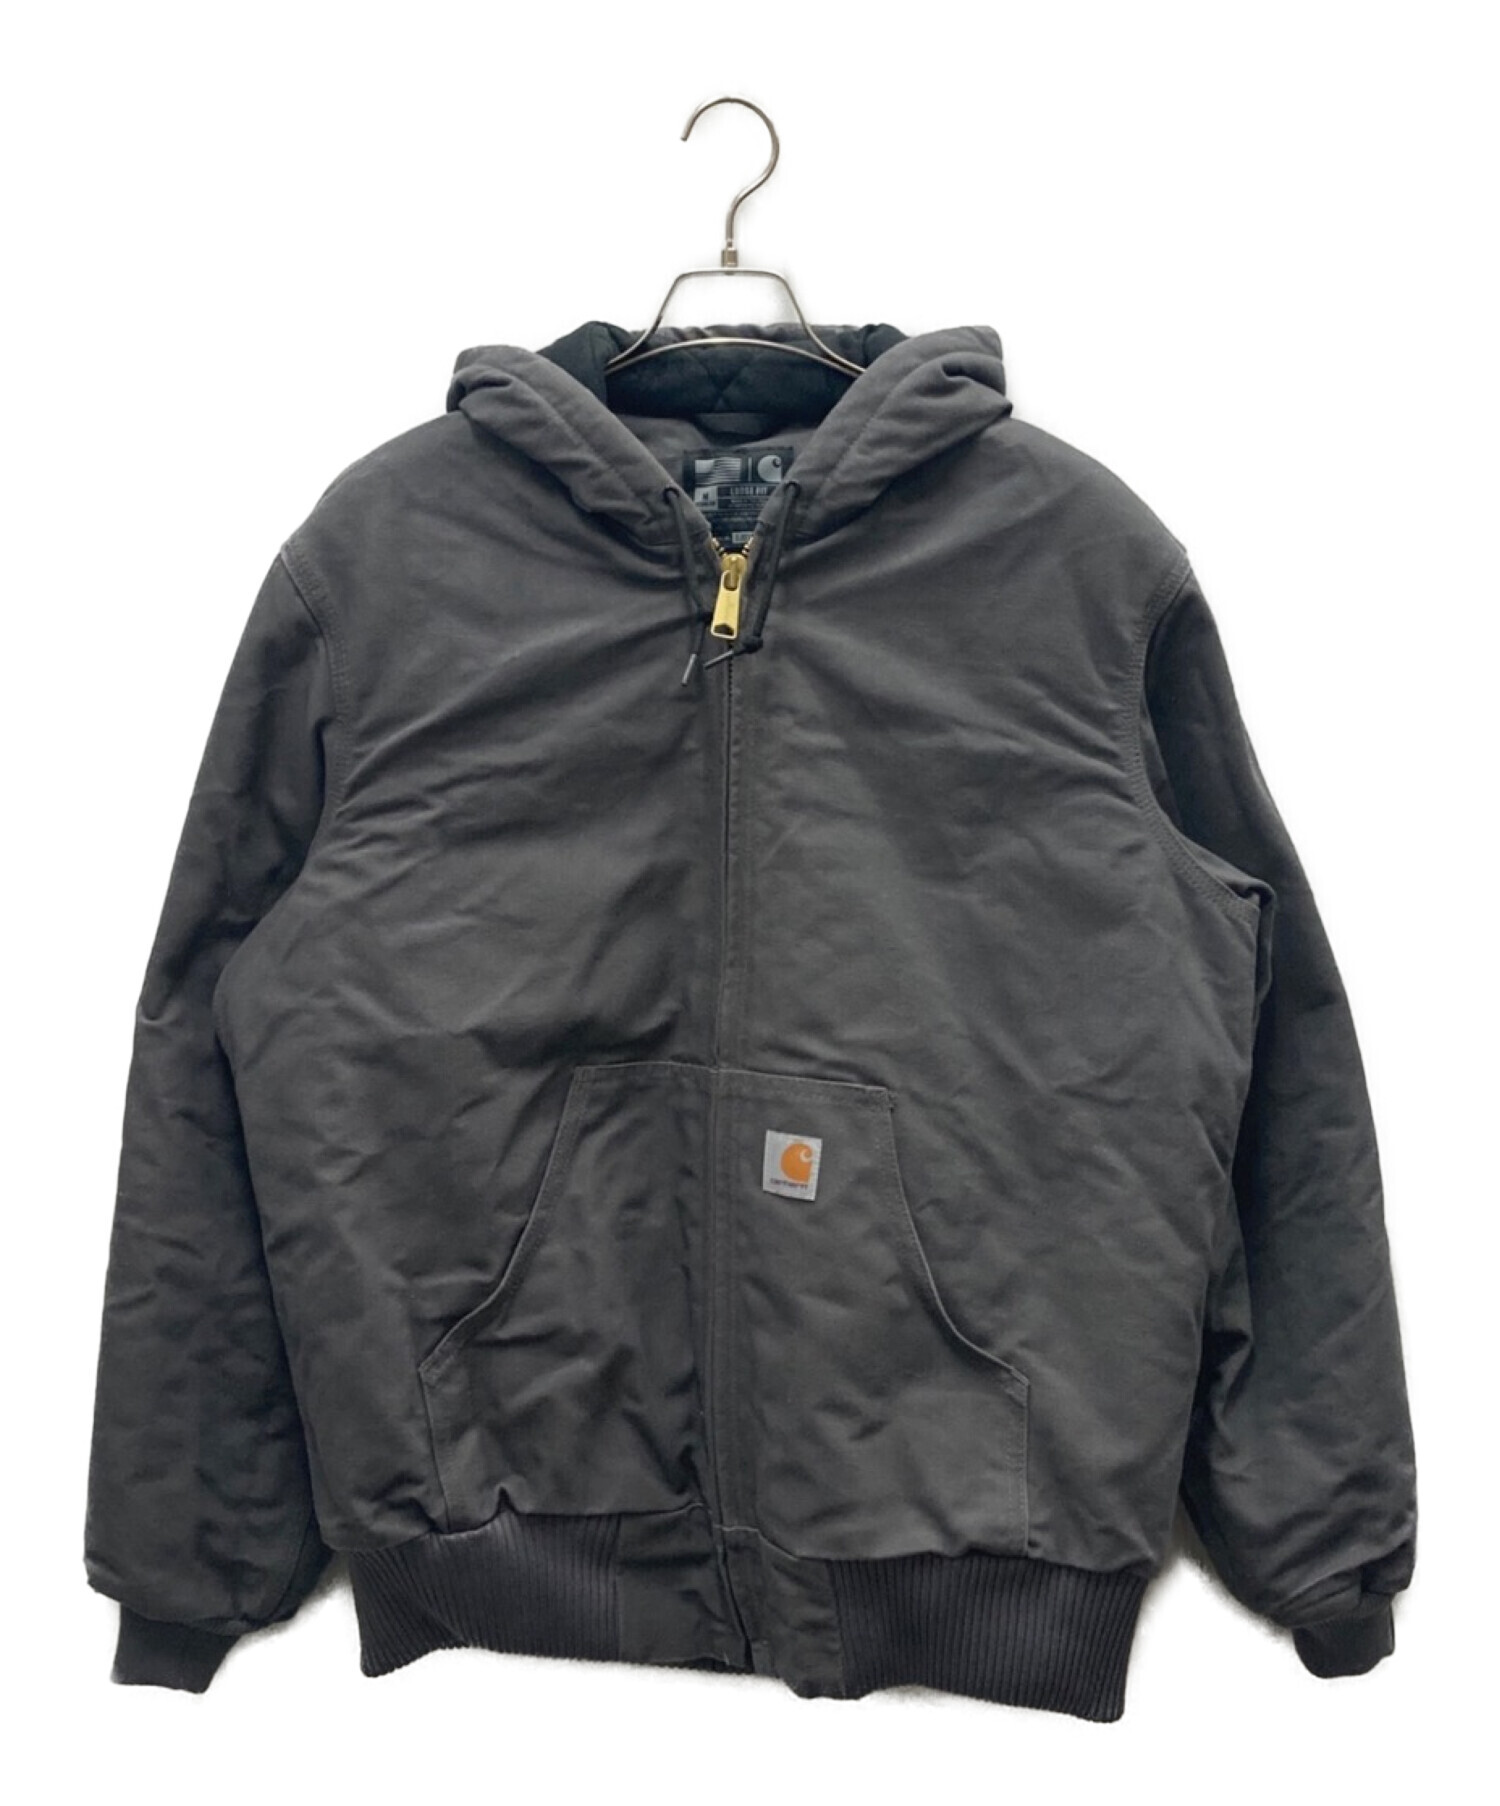 CarHartt (カーハート) DUCK ACTIVE JACKET THERMAL LINED グレー サイズ:M